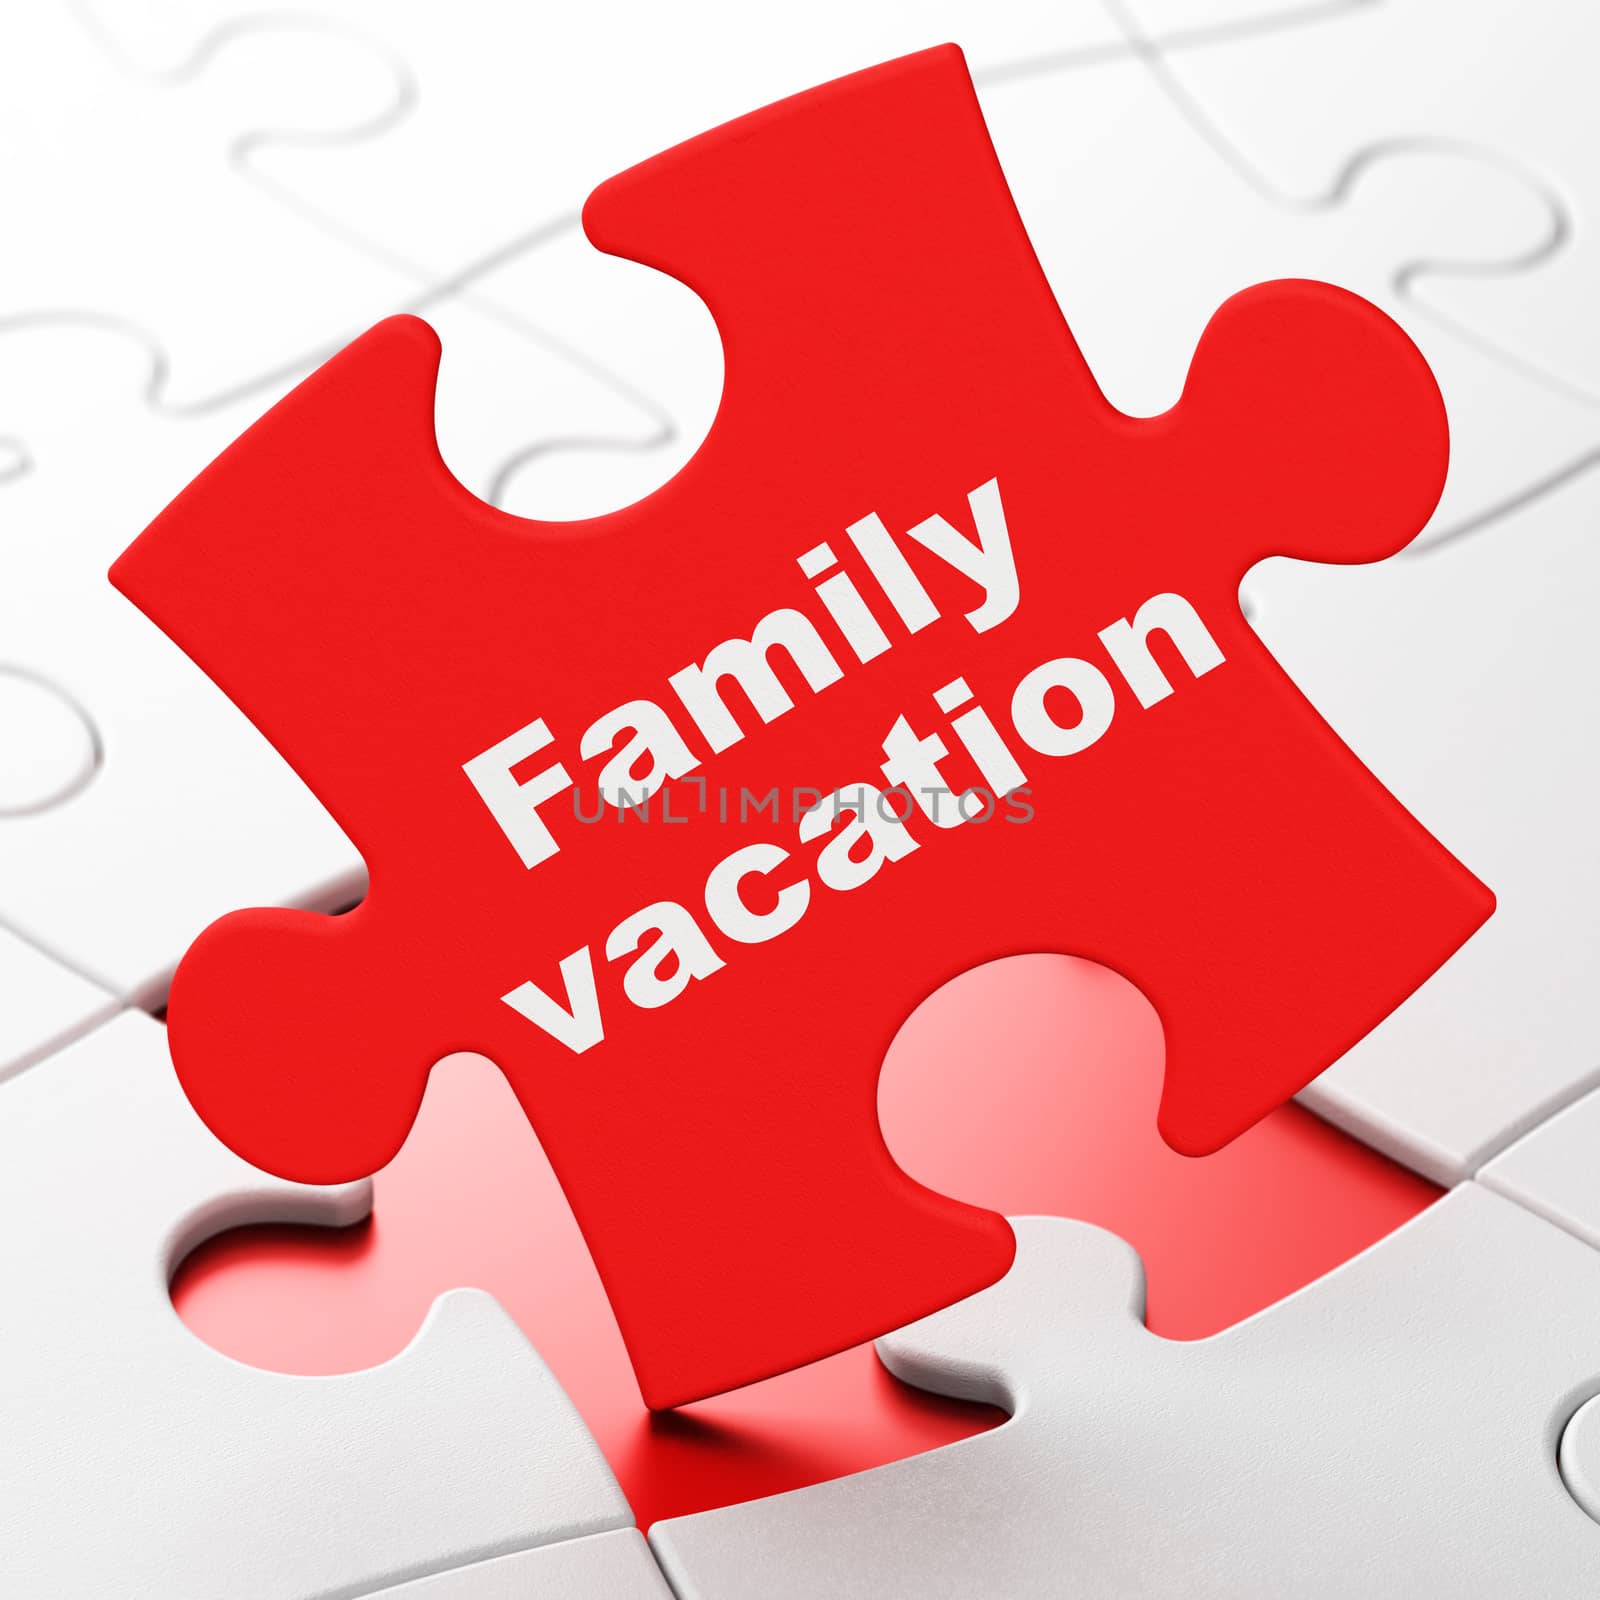 Vacation concept: Family Vacation on puzzle background by maxkabakov